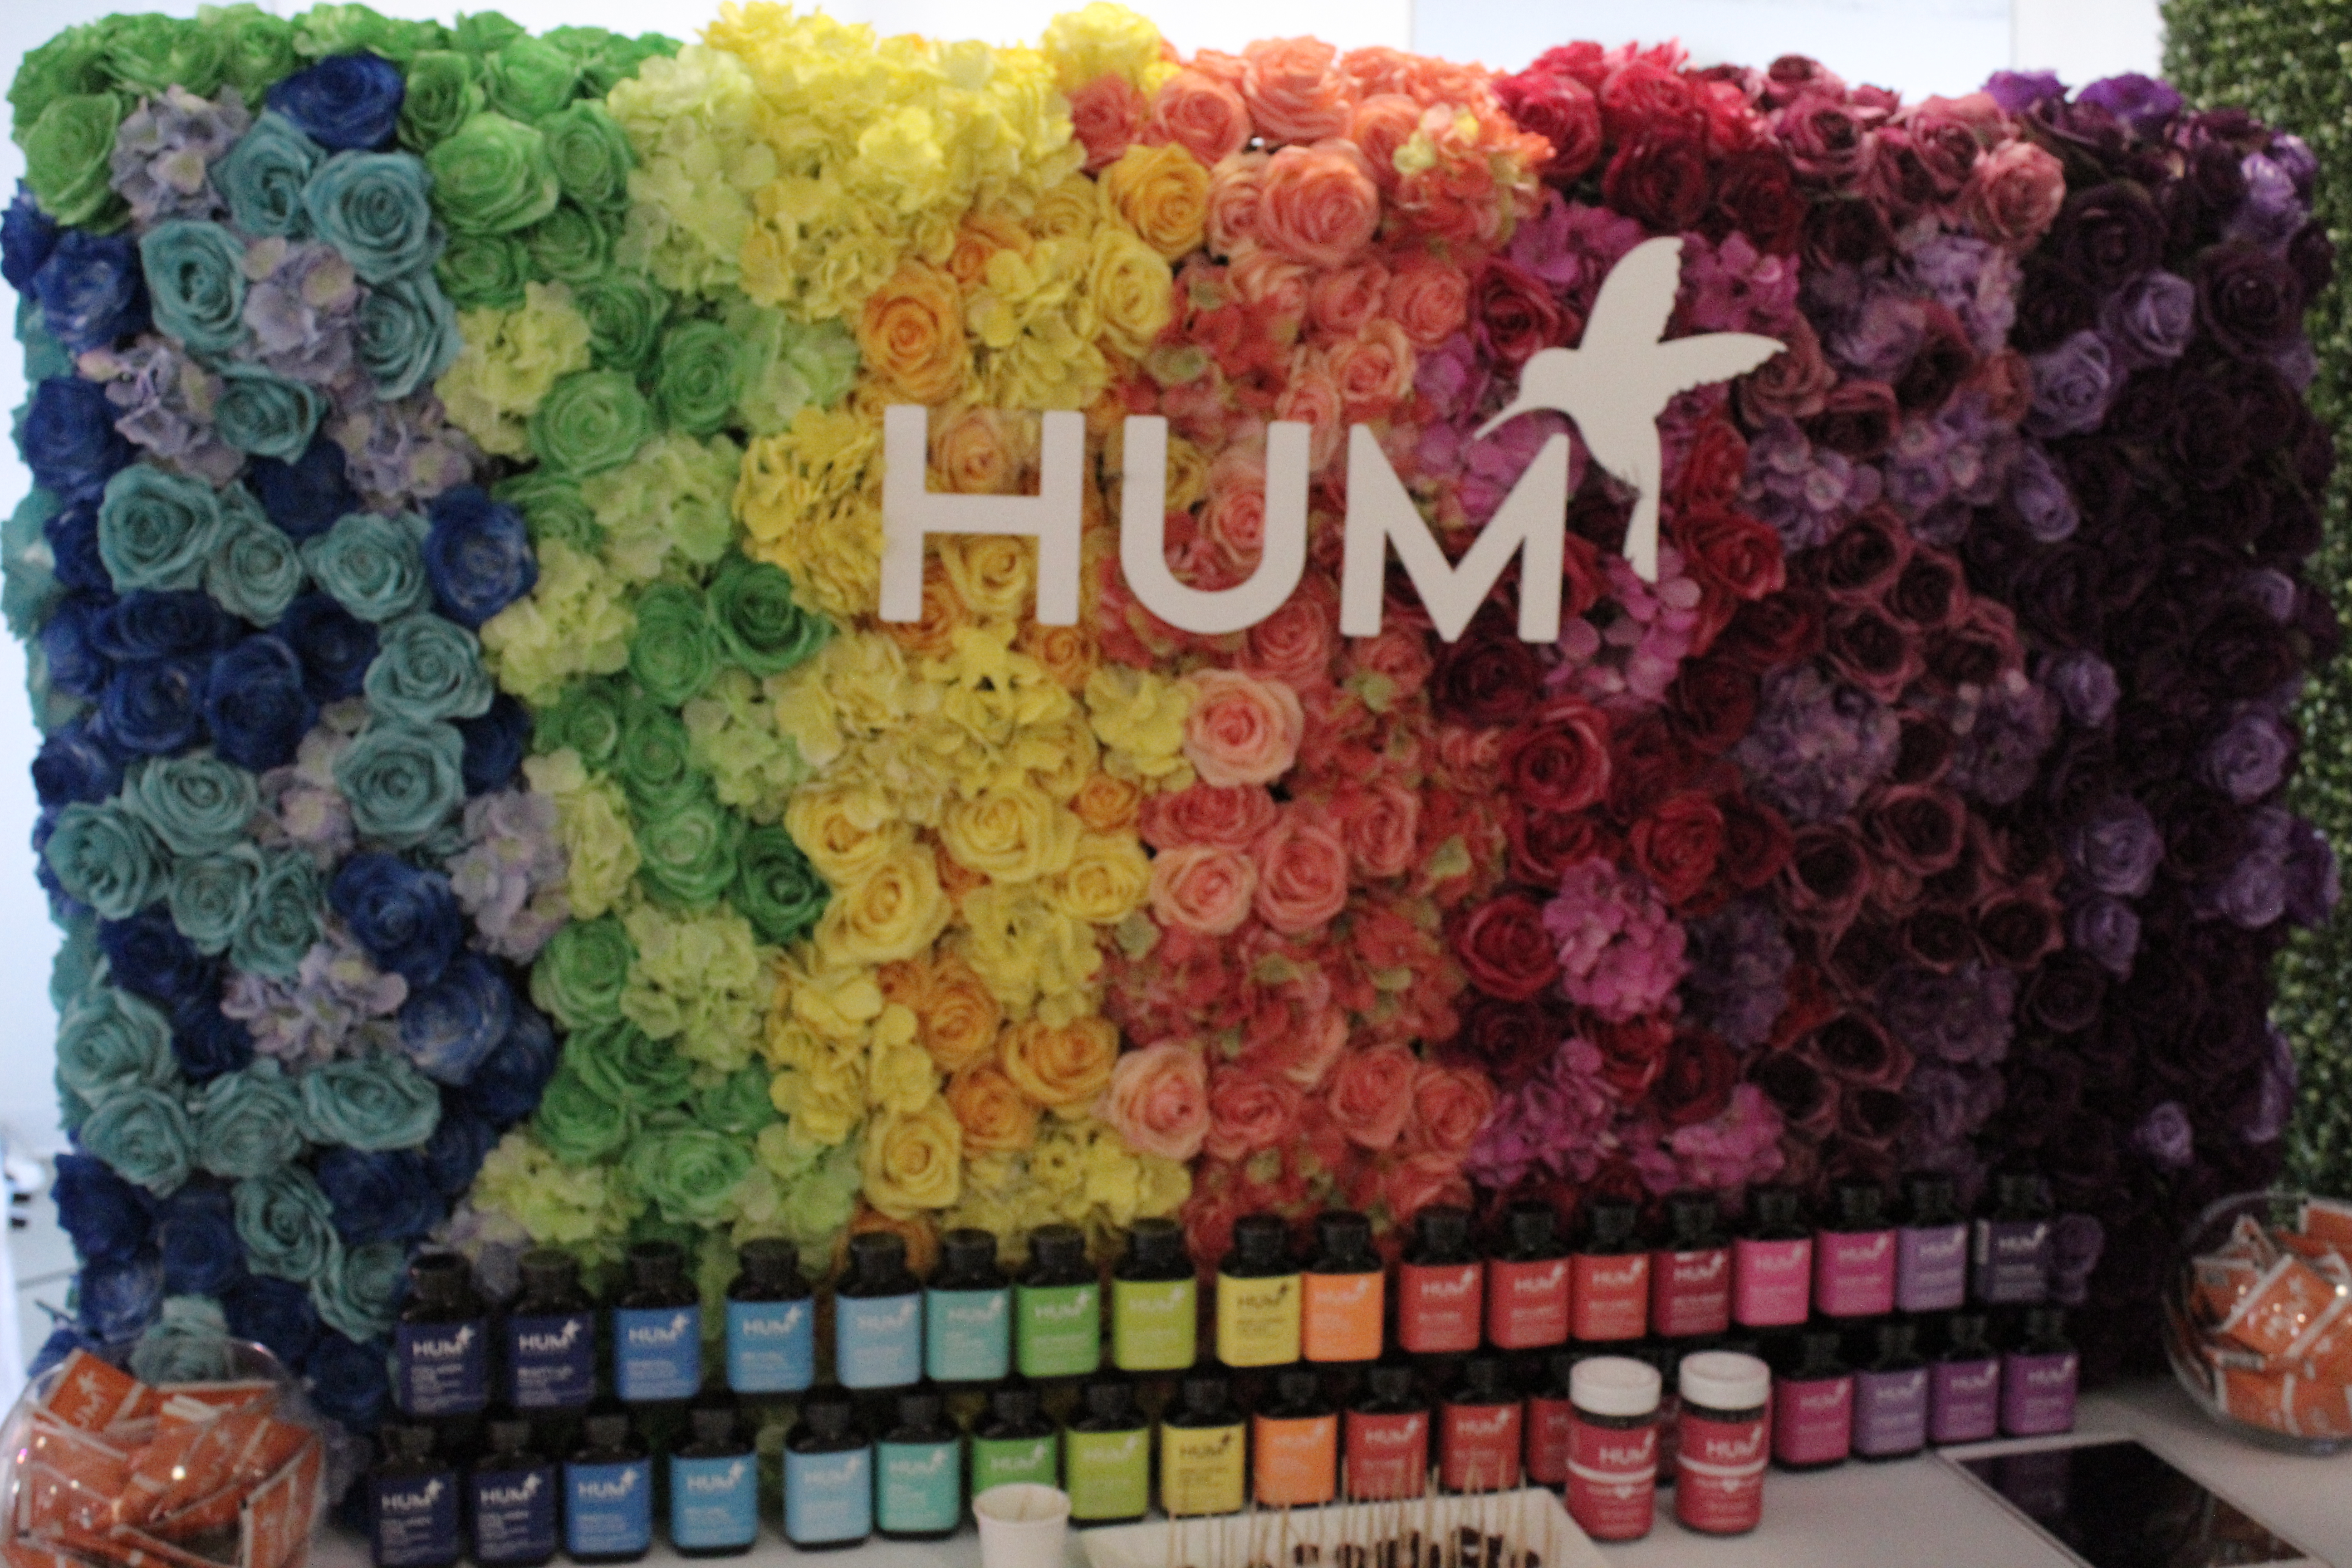 Hum Nutrition at Indie Beauty Expo